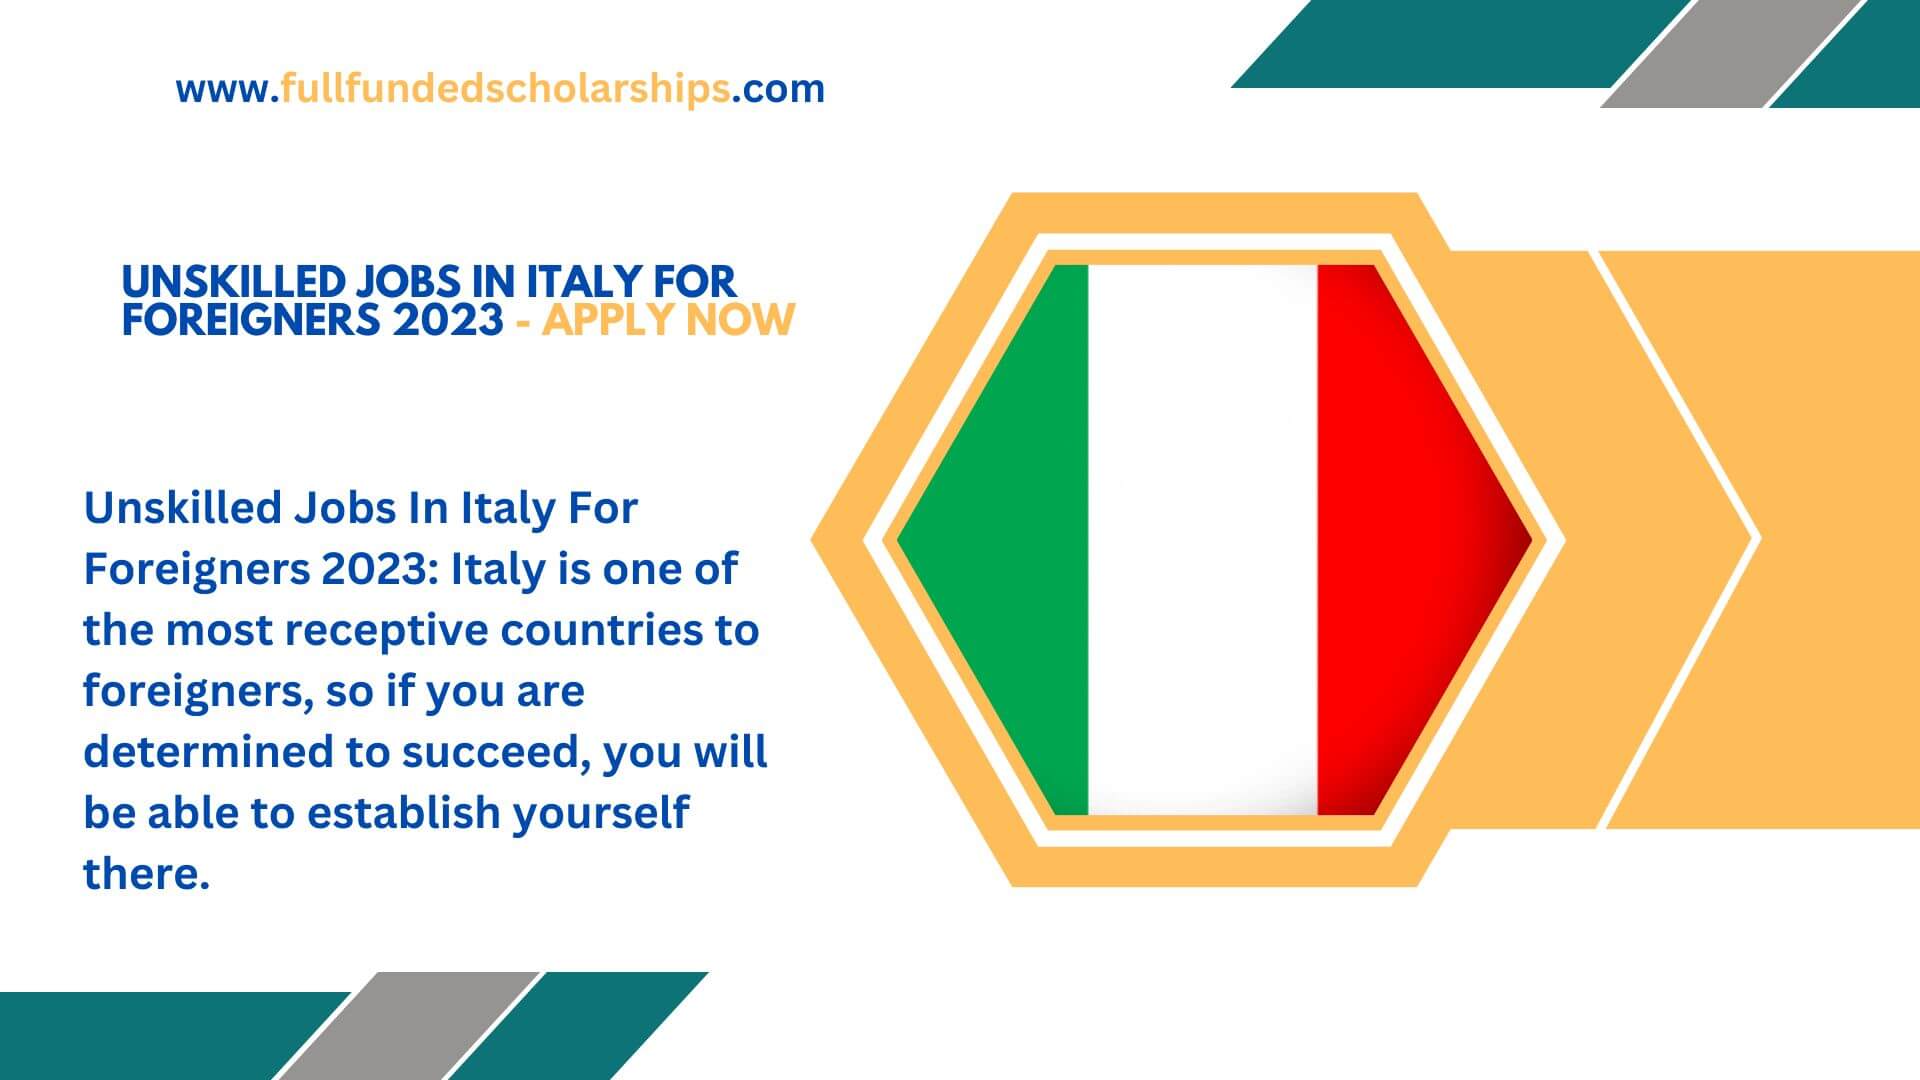 Unskilled Jobs In Italy For Foreigners 2023 - Apply Now